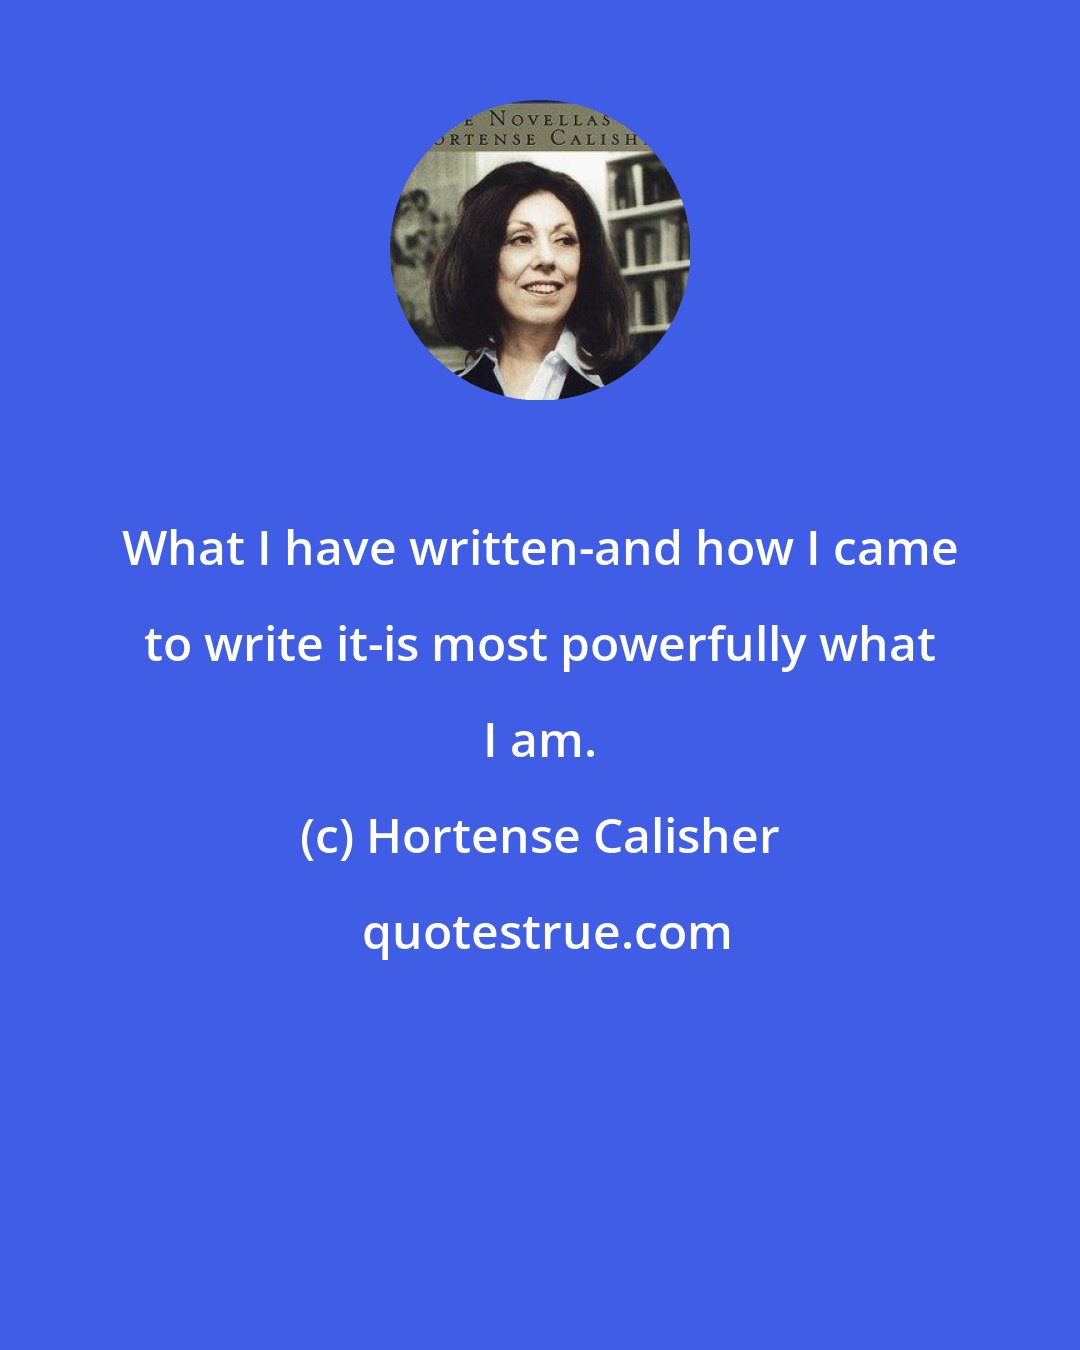 Hortense Calisher: What I have written-and how I came to write it-is most powerfully what I am.